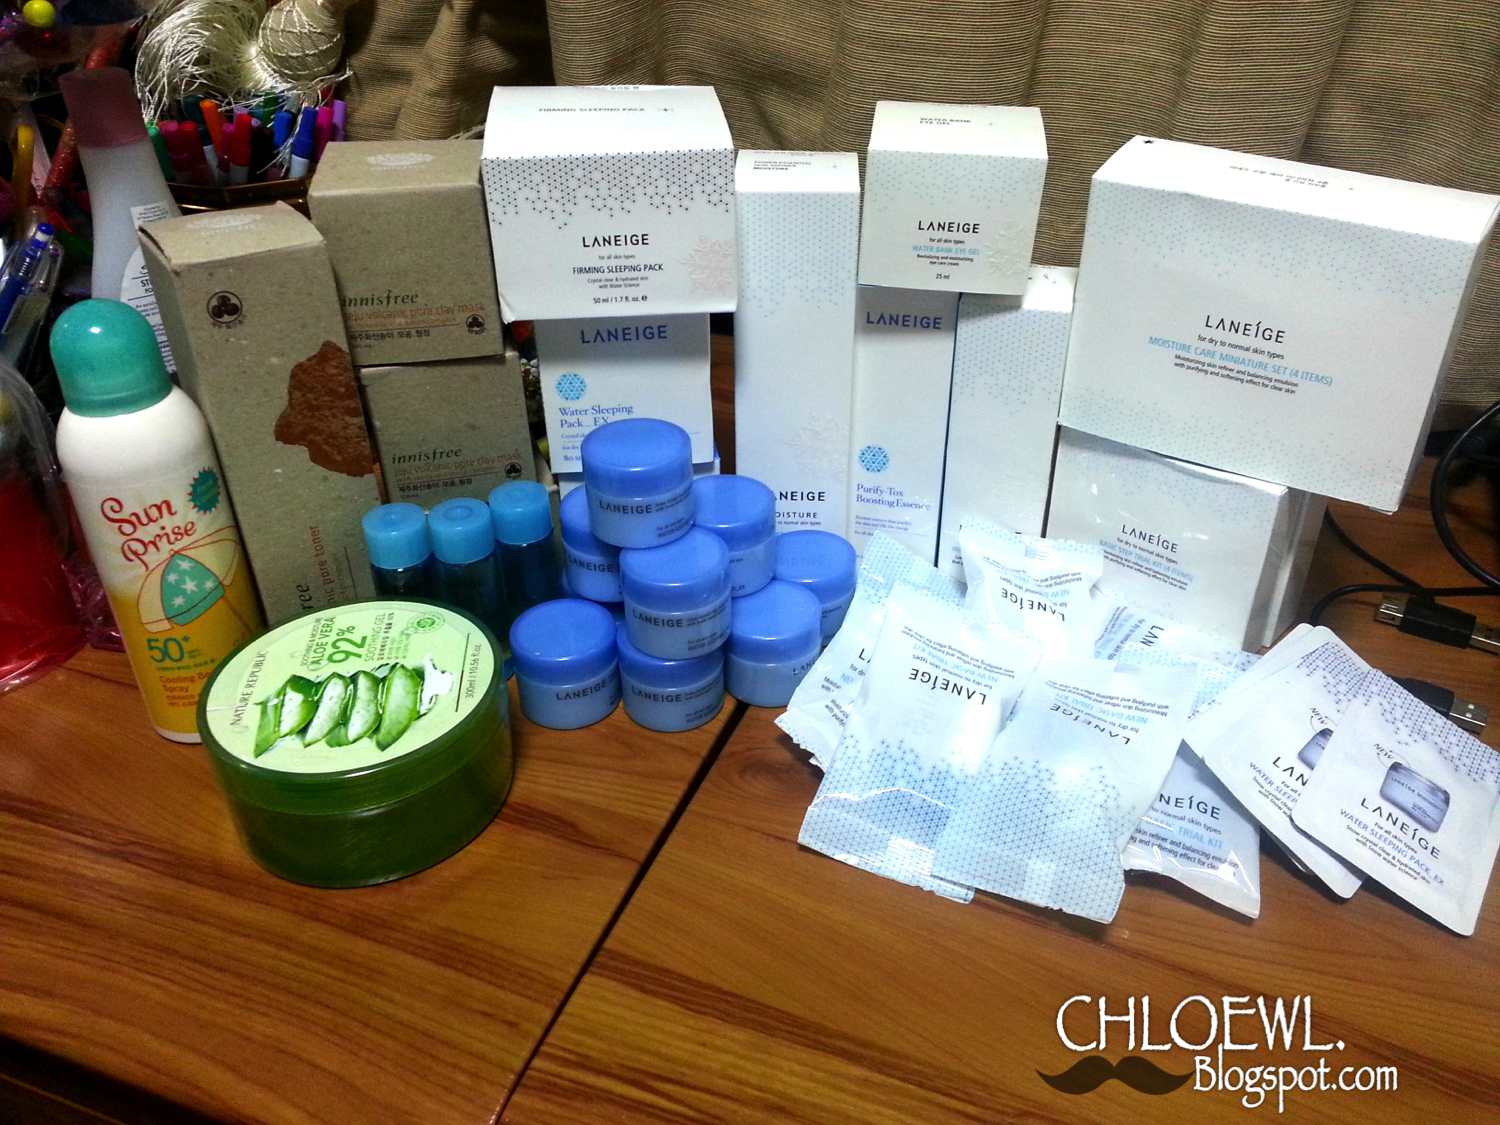 Chloe WL: Confessions of a Shopaholic: 8 Things to buy from Korea! :D